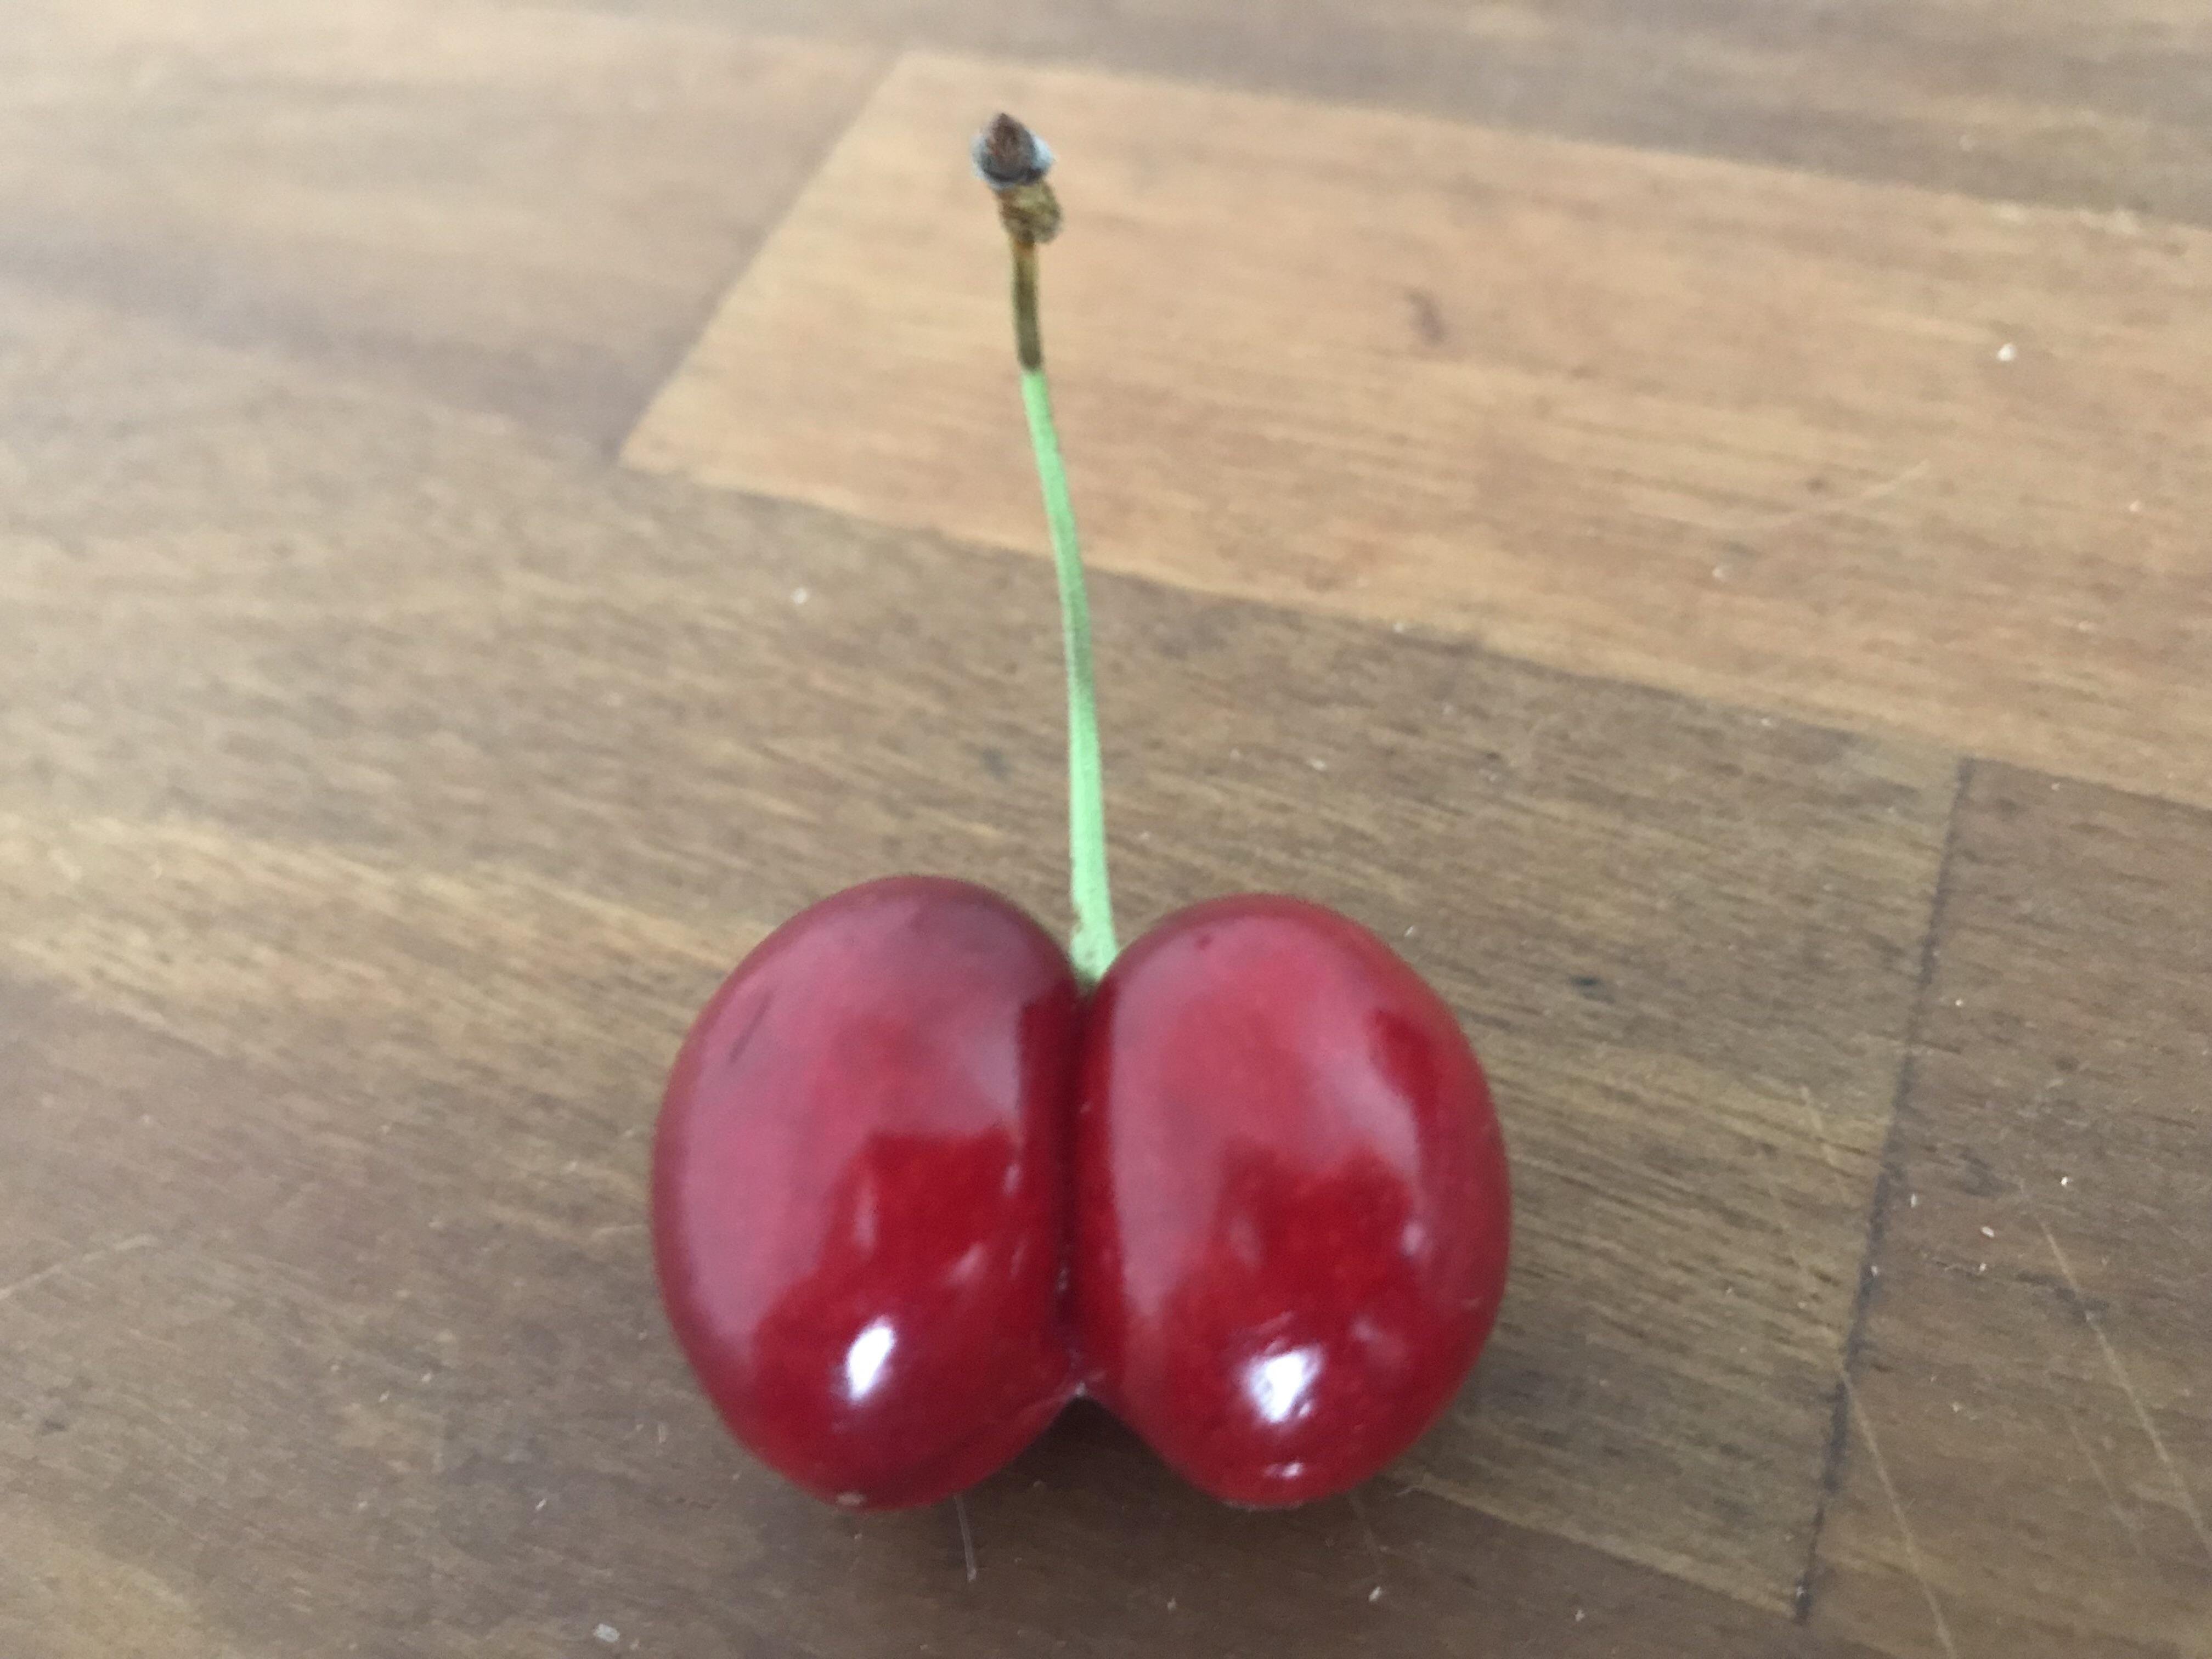 This cherry’s on top